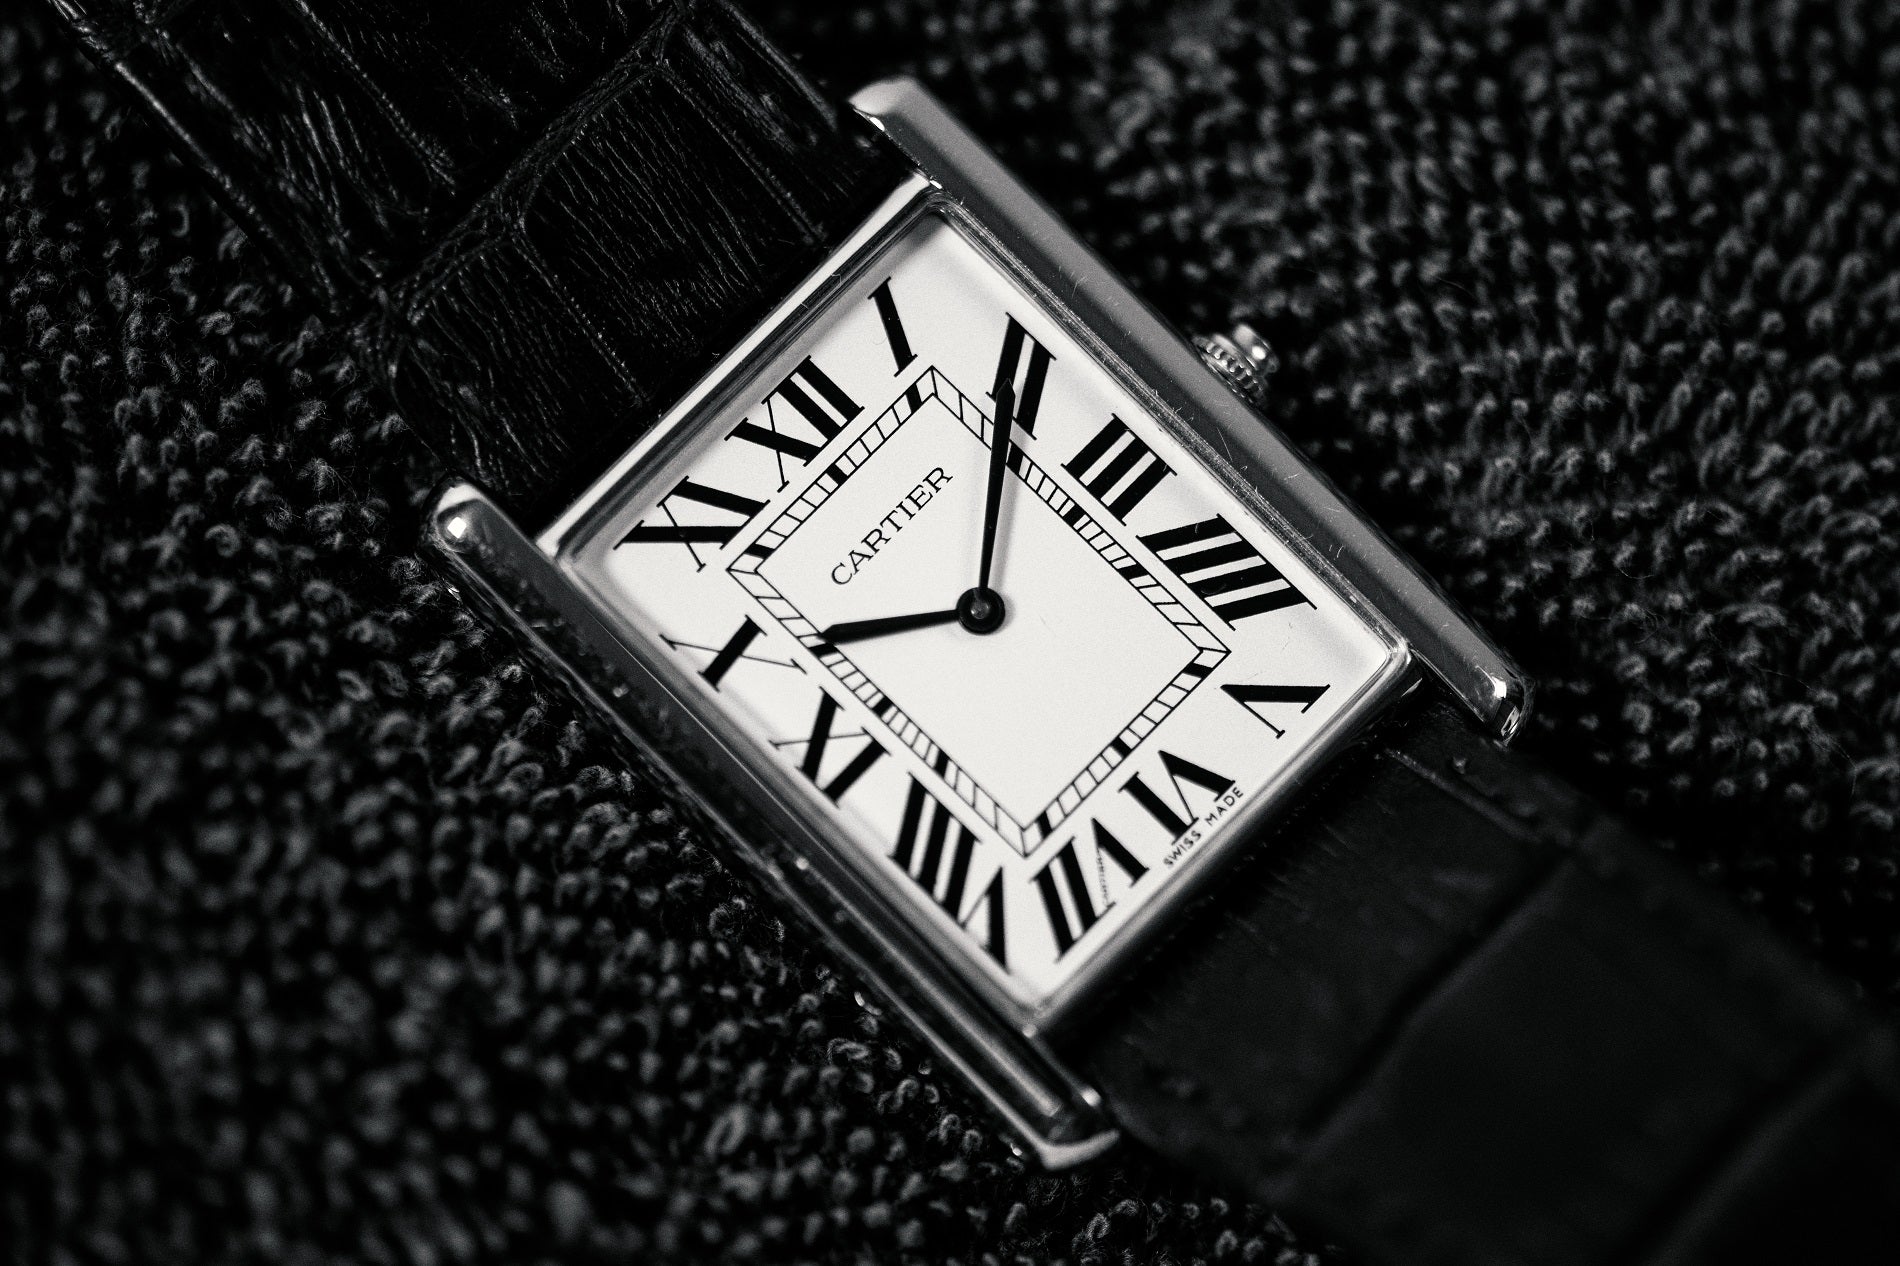 Vintage Cartier Watches - Quality Craftsmanship & Contemporary Styling